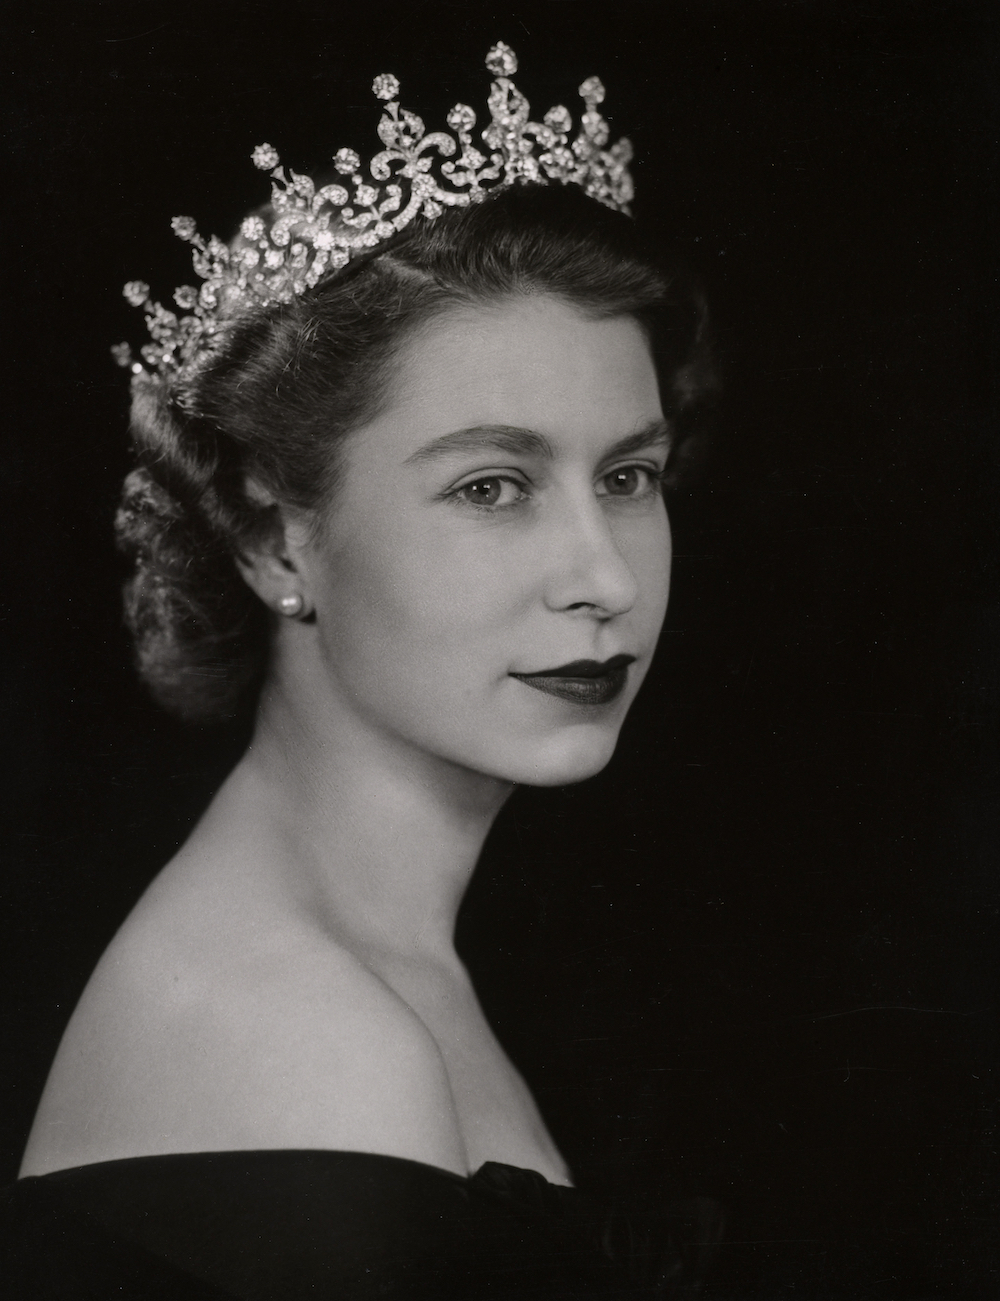 Dorothy Wilding portrait of HM Queen Elizabeth II, 26 February 1952. The Queen wears The Girls of Great Britain and Ireland Tiara. © Royal Collection Trust/All Rights Reserved